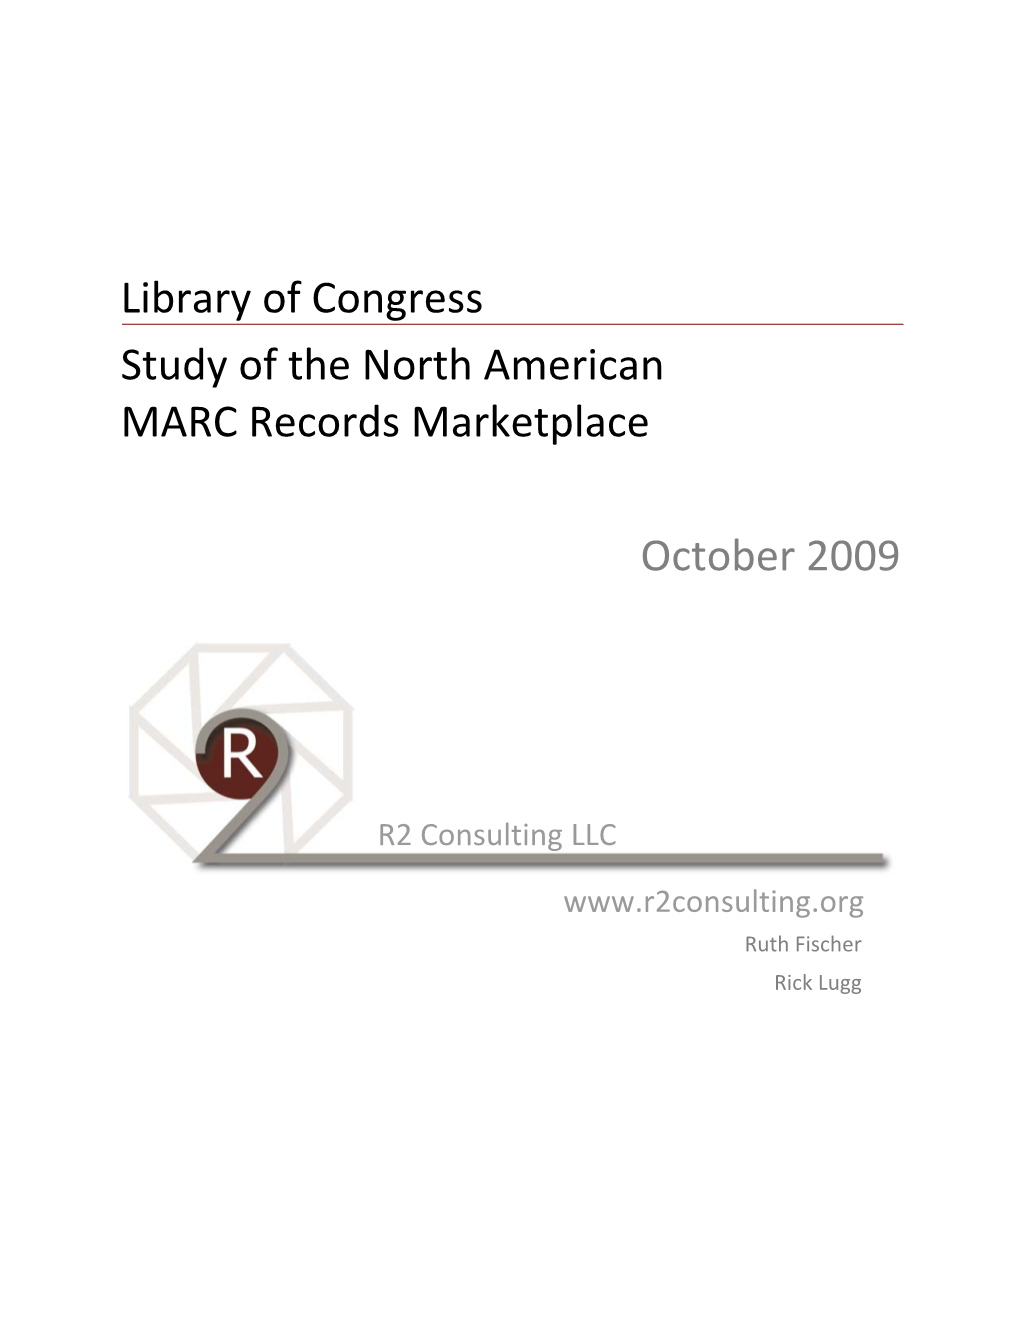 Study of the North American MARC Records Marketplace